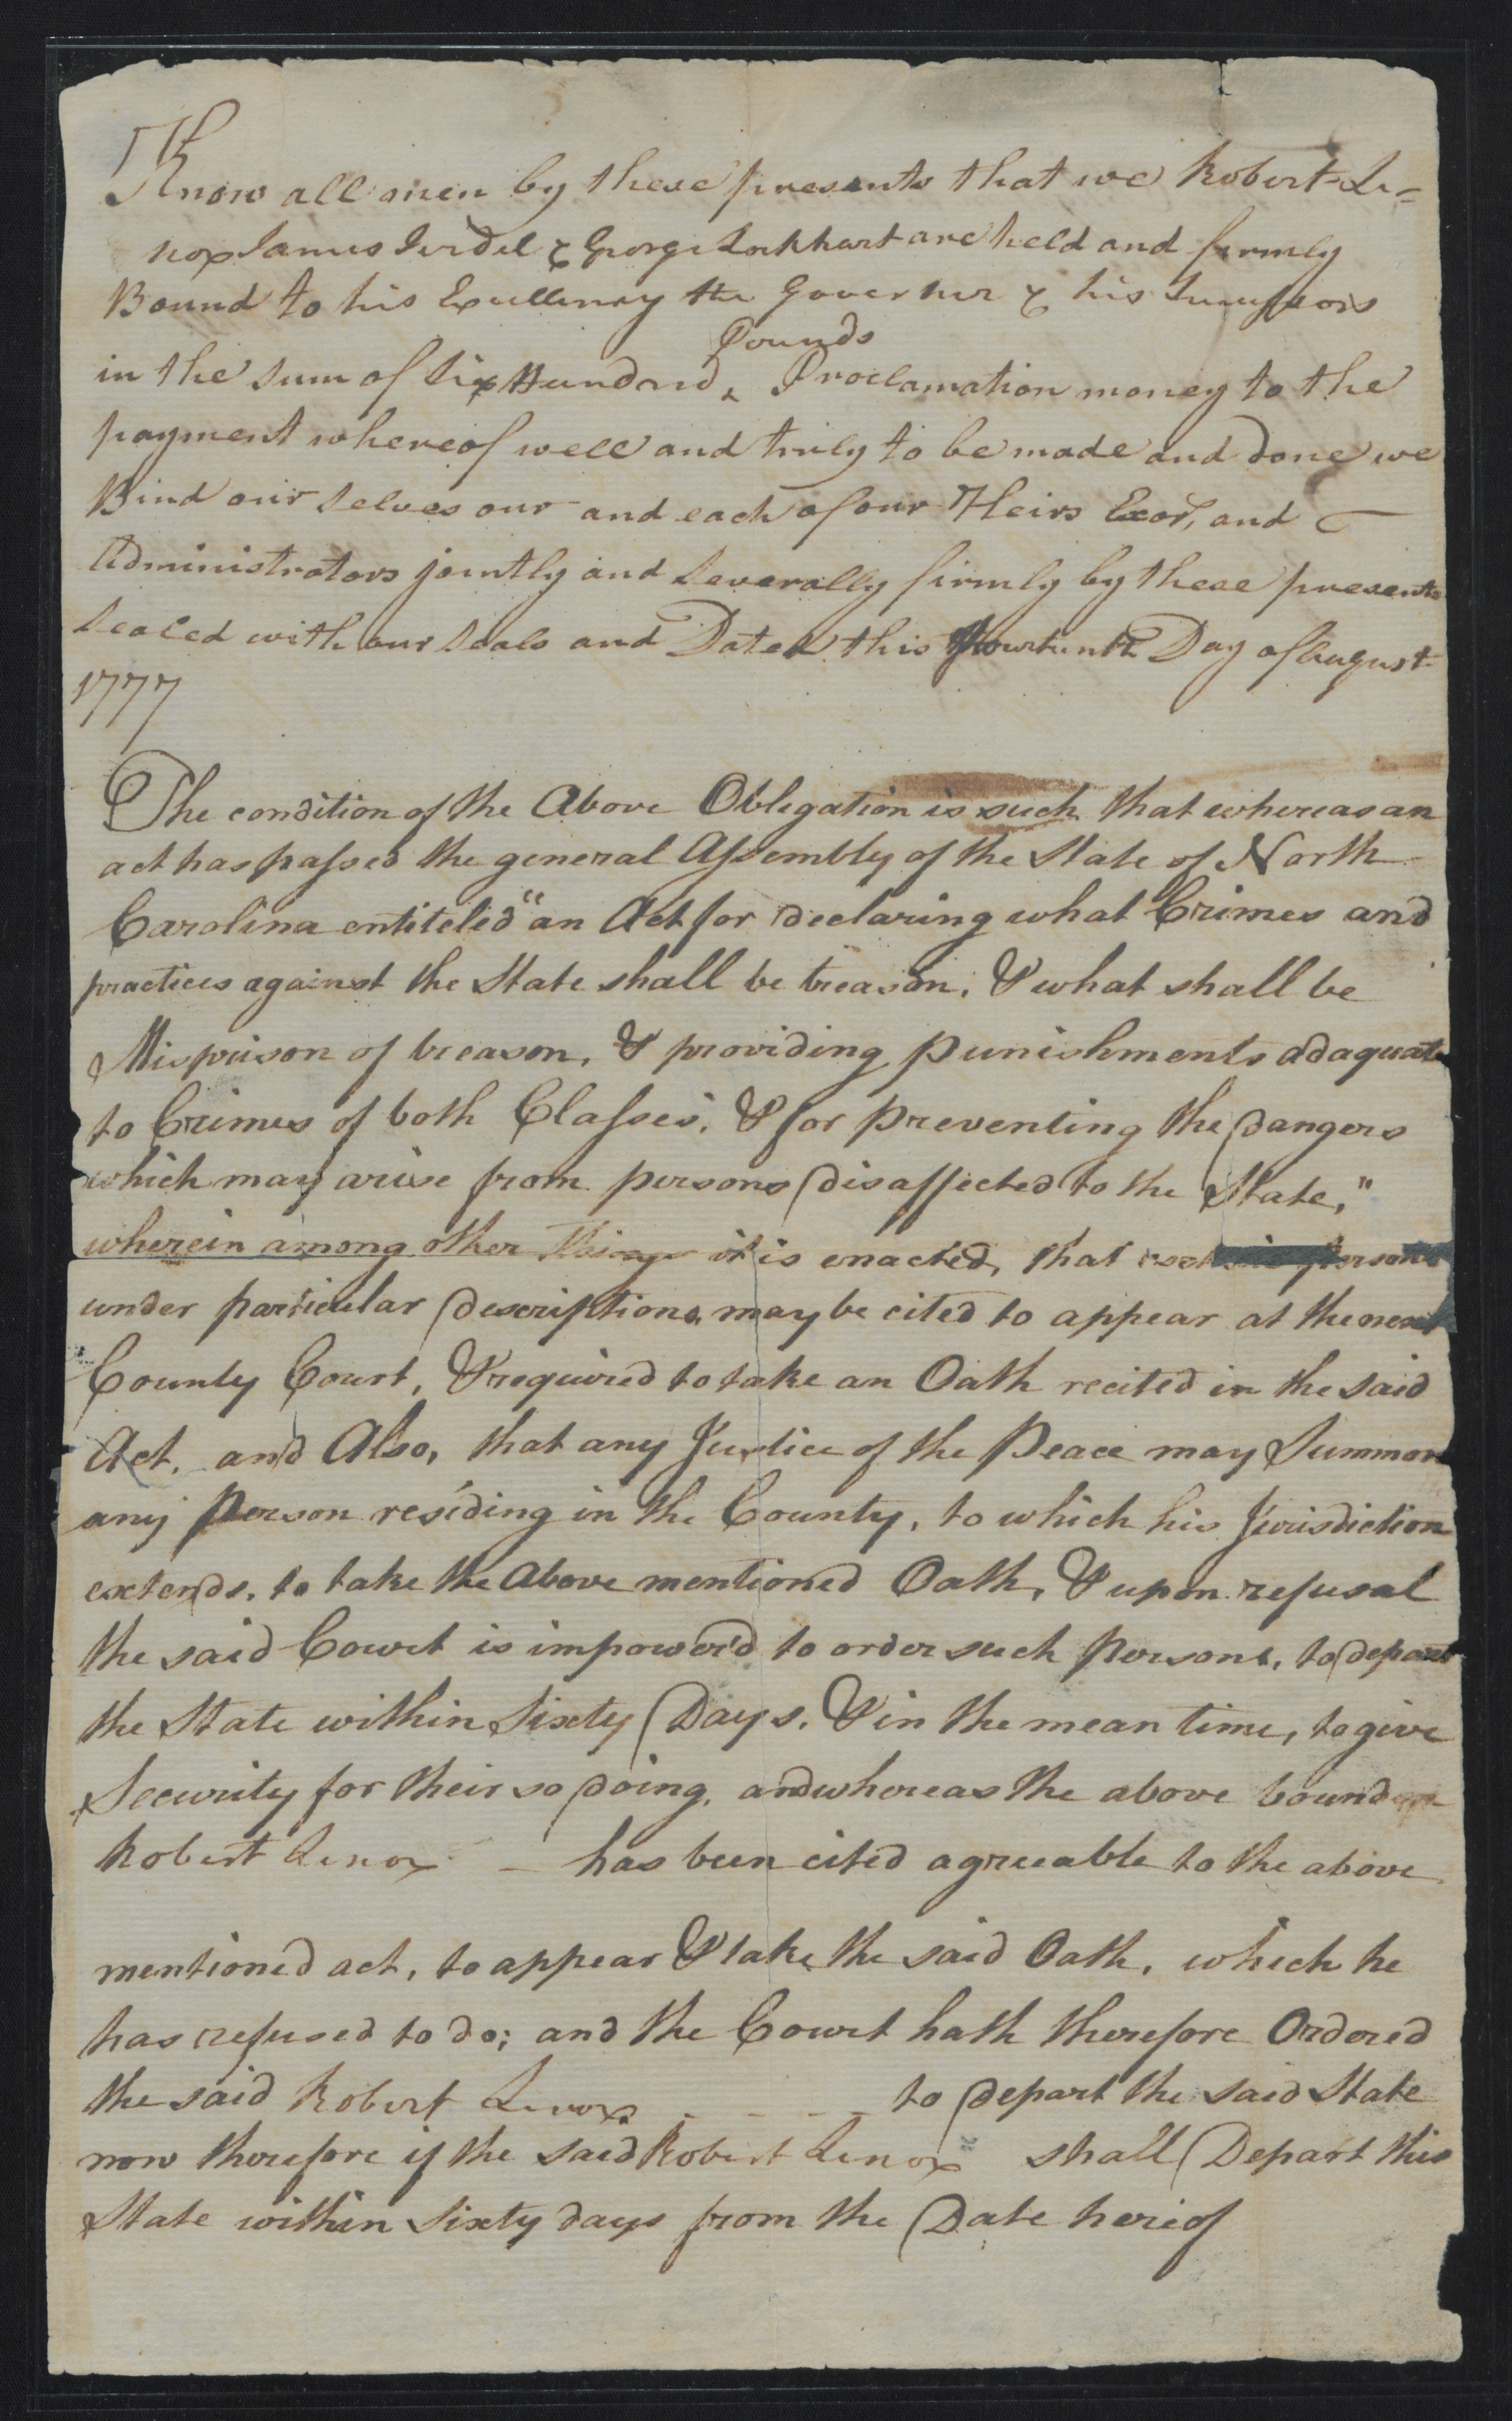 Bond from the Bertie County Court for Robert Lenox to leave North Carolina, 14 August 1777, page 1